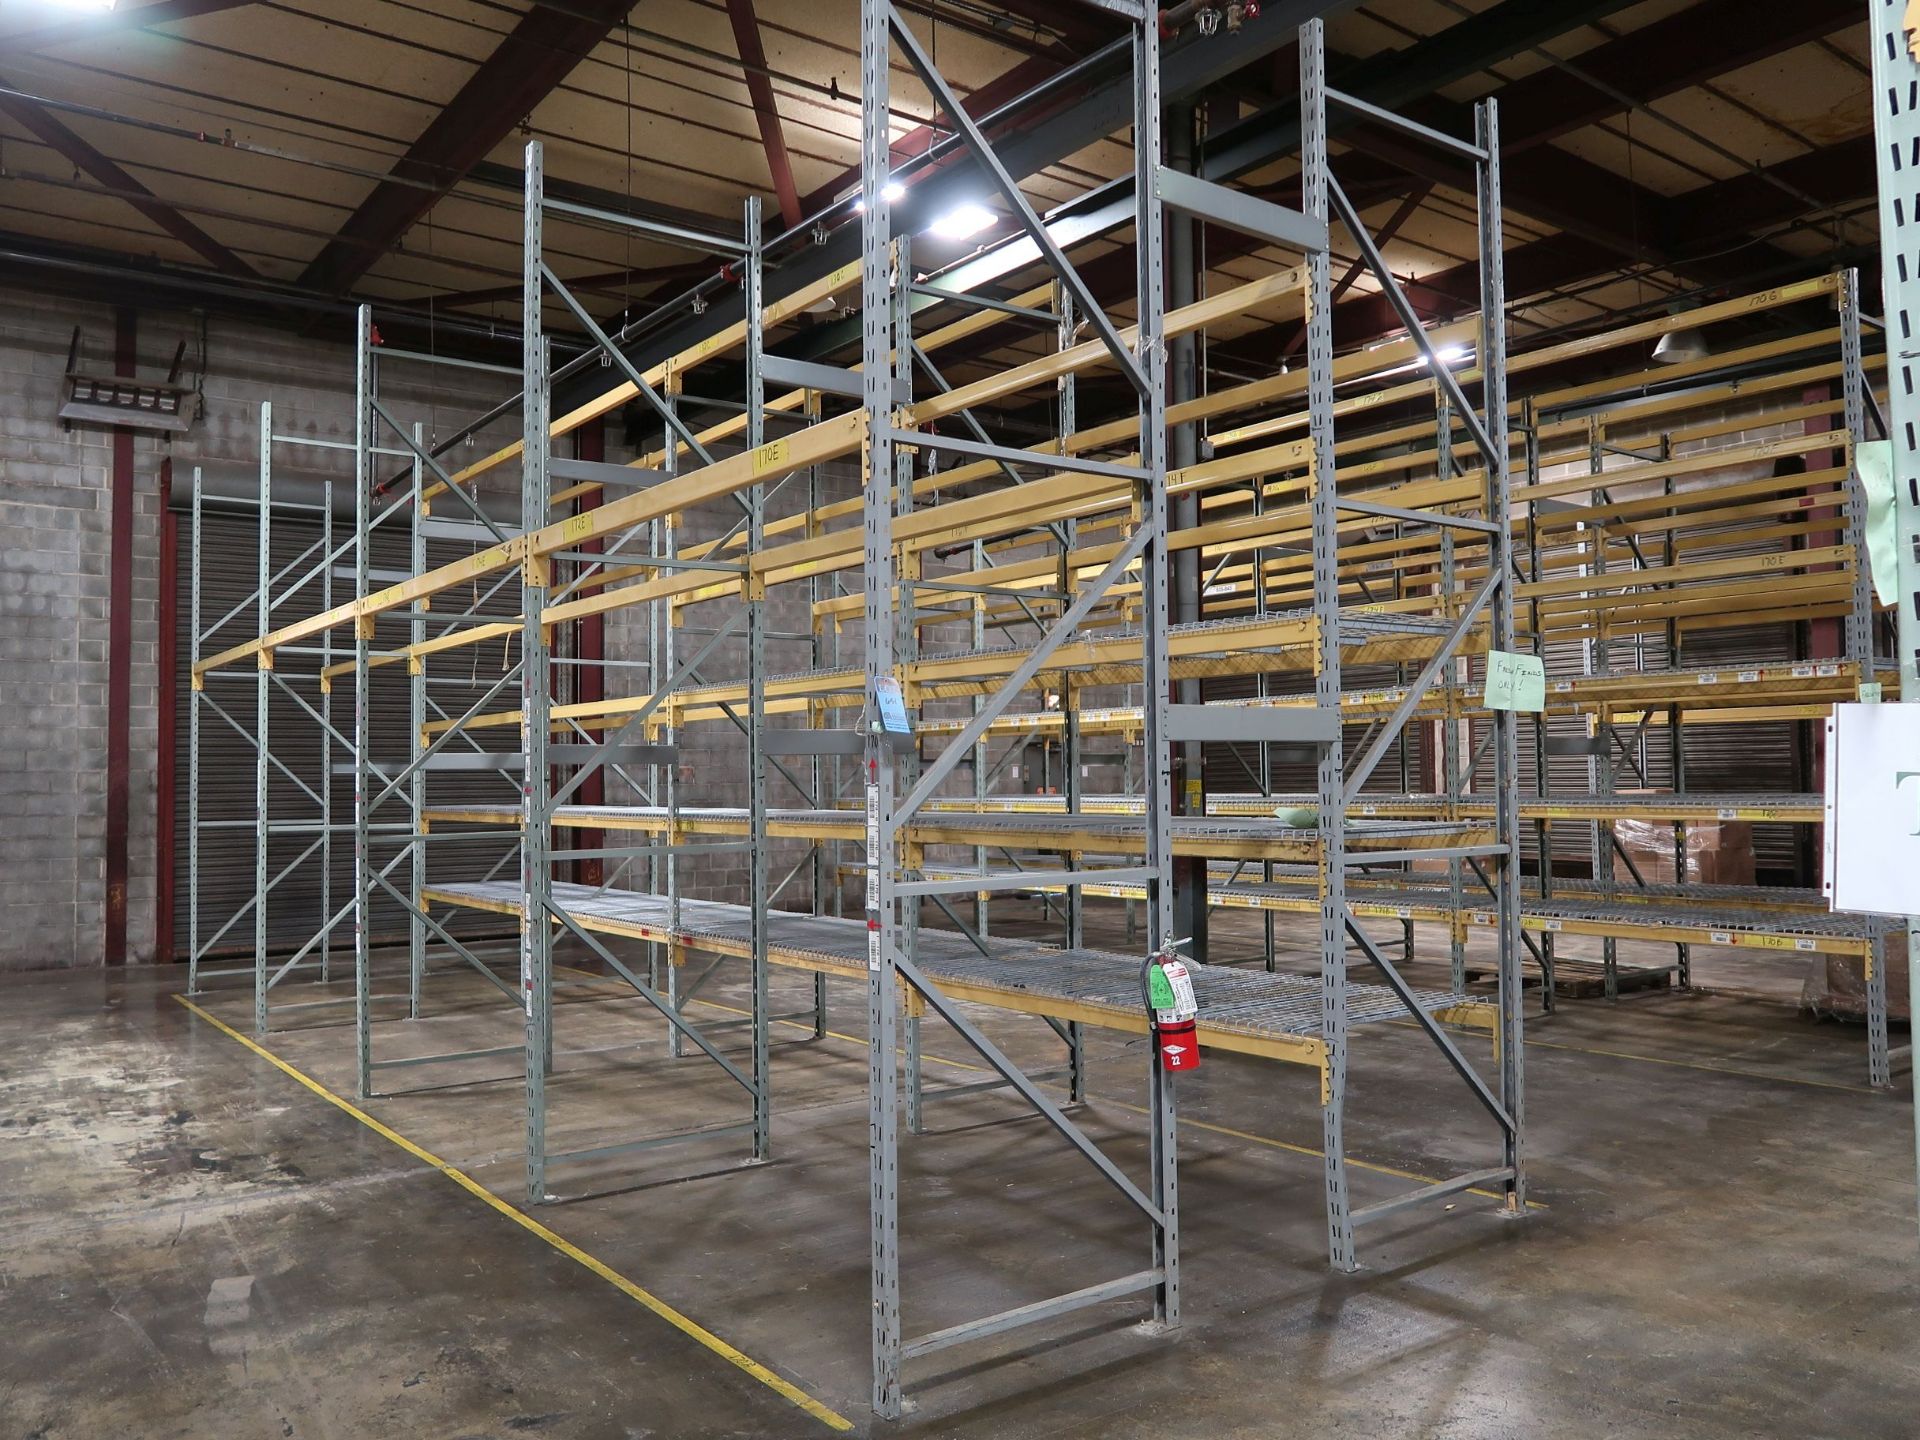 SECTIONS 96" X 42" X 168" ADJUSTABLE BEAM PALLET RACK; (10) 42" X 168" UPRIGHTS, (50) 96" X 3"